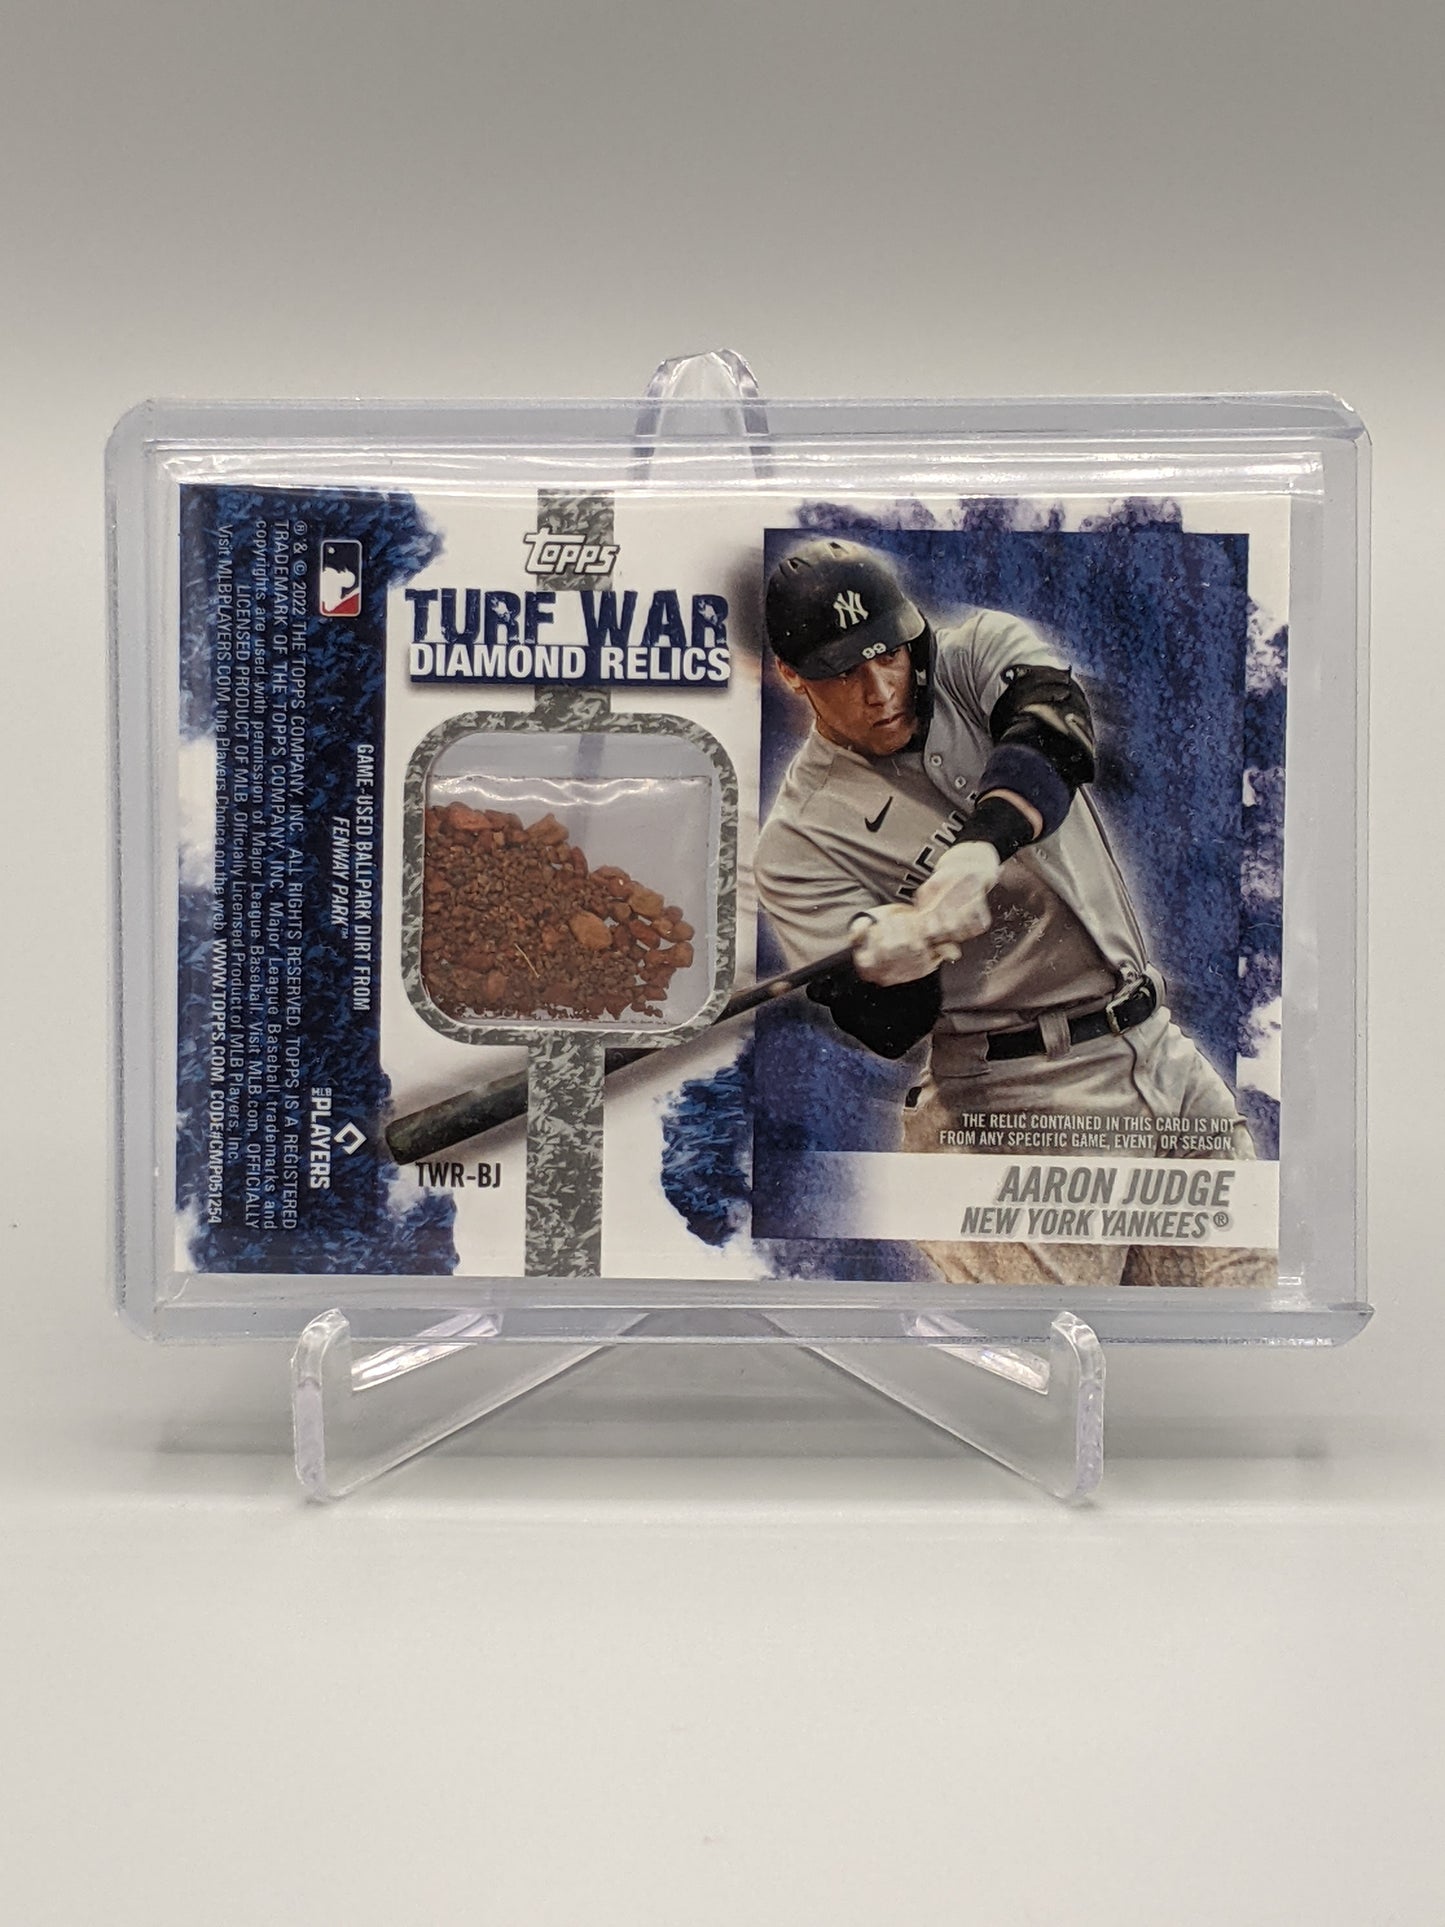 2022 Topps Opening Day Turf War Relic #TWR-BJ Bogaerts/Judge Red Sox Yankees